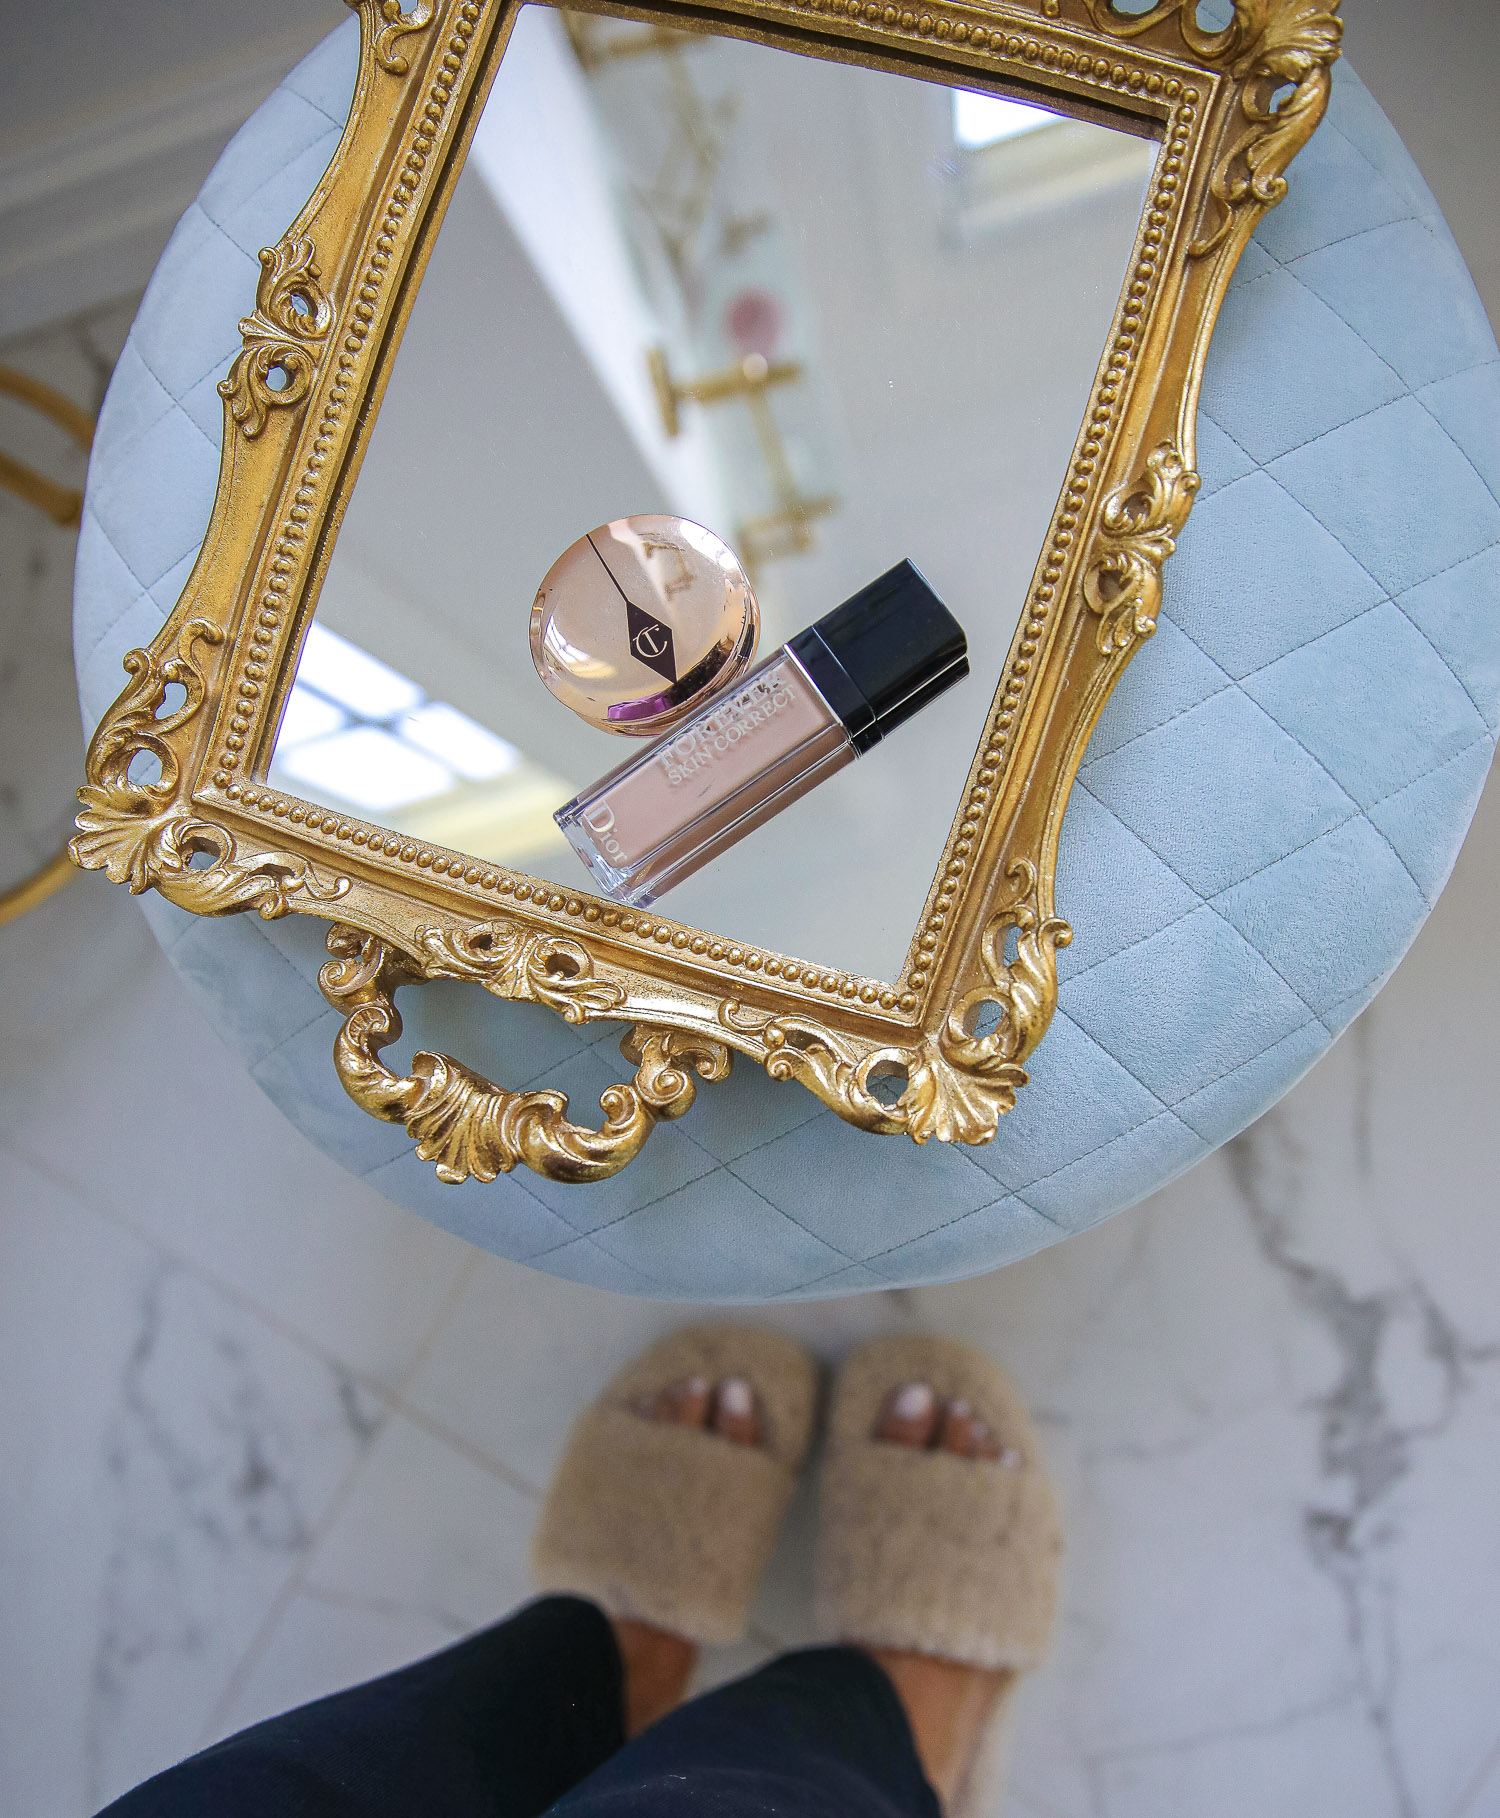 nordstrom beauty must haves fall 2021, sisley pore minimizer review, sisley blur powder review, sisley hyaluronic acid, emily gemma beauty must haves, hoola bronzer palette | Beauty Favorites by popular US beauty blog, The Sweetest Thing: image of a bottle of foundation and a bronzer compact on a mirrored gold frame tray.